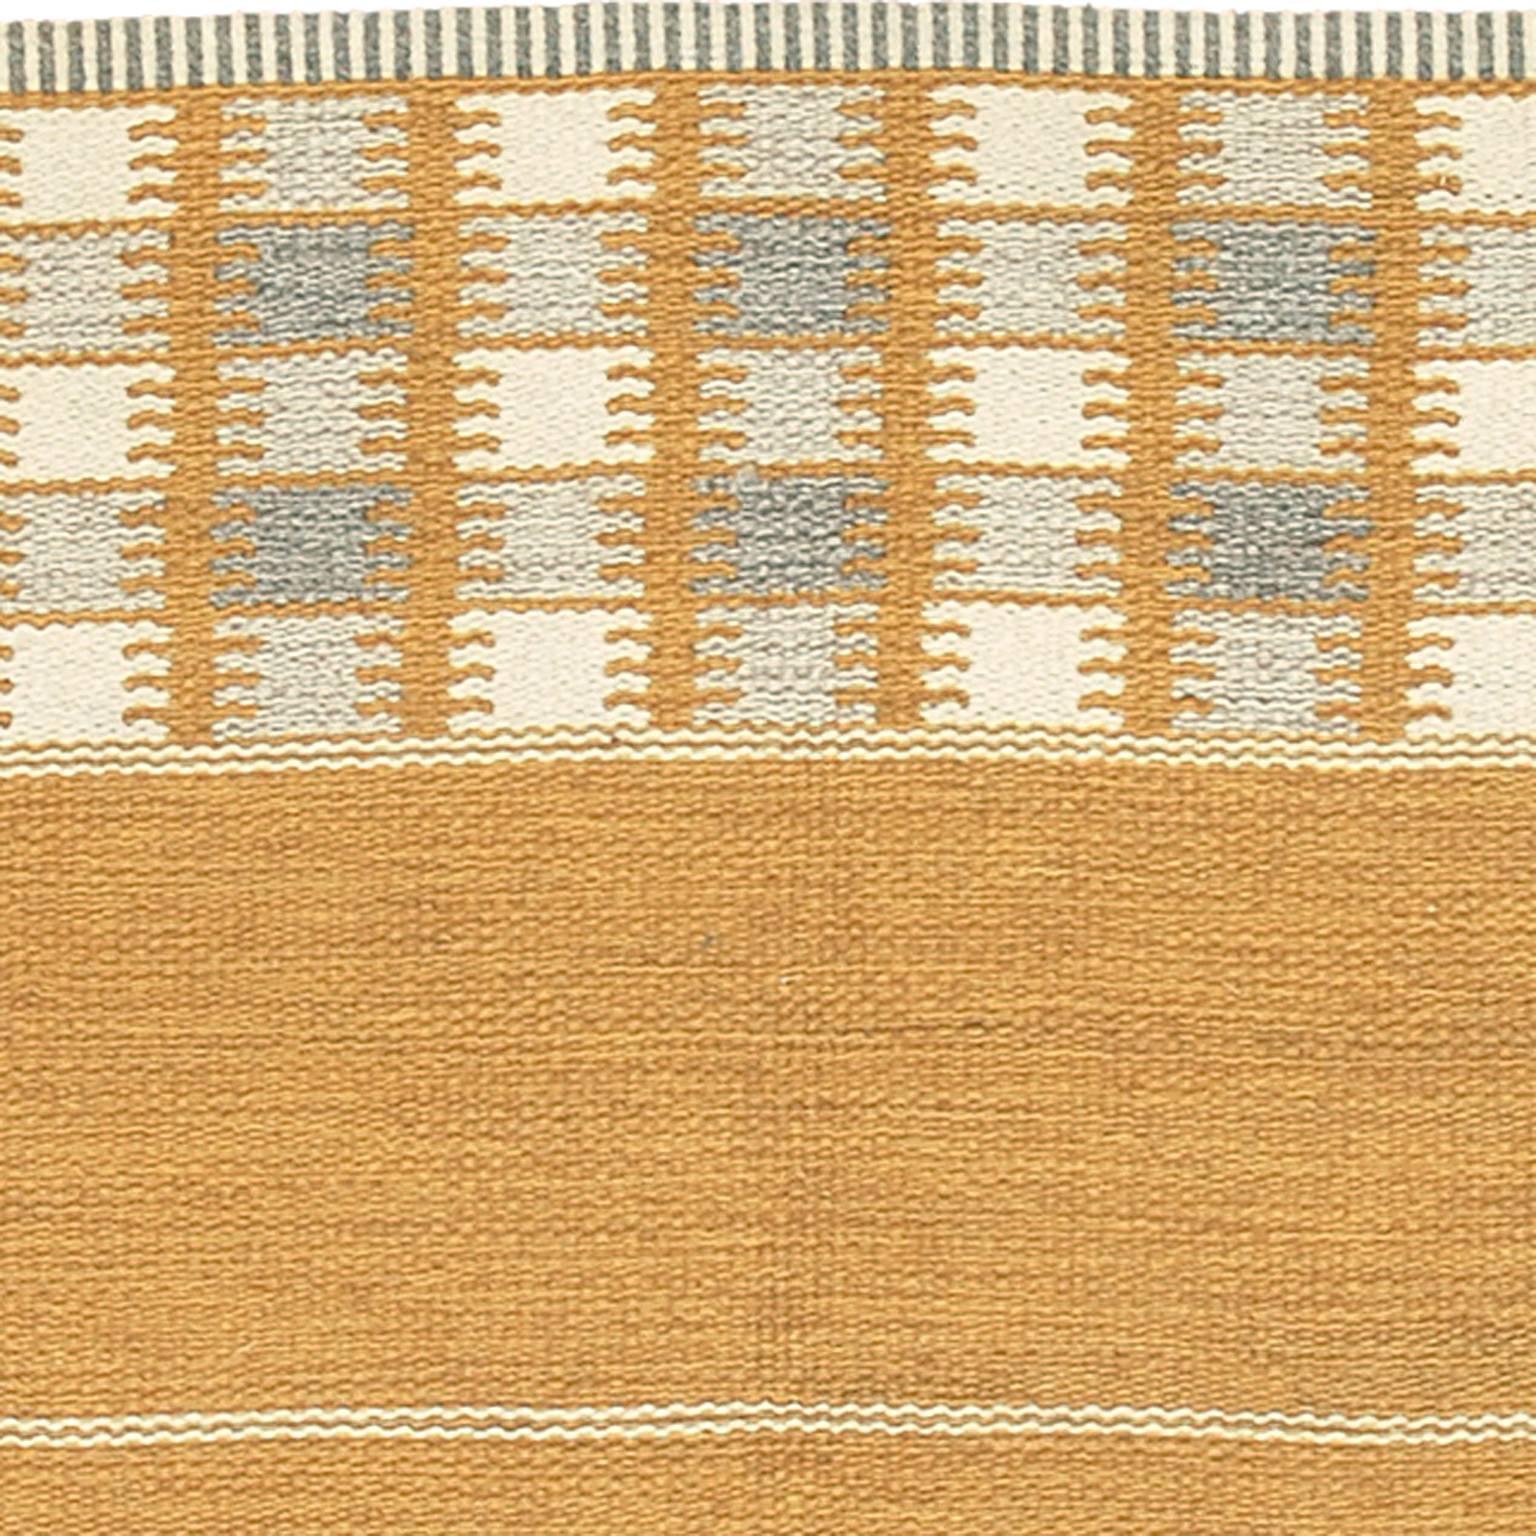 Hand-Woven Mid-20th Century Double Sided Swedish Flat Weave Carpet For Sale